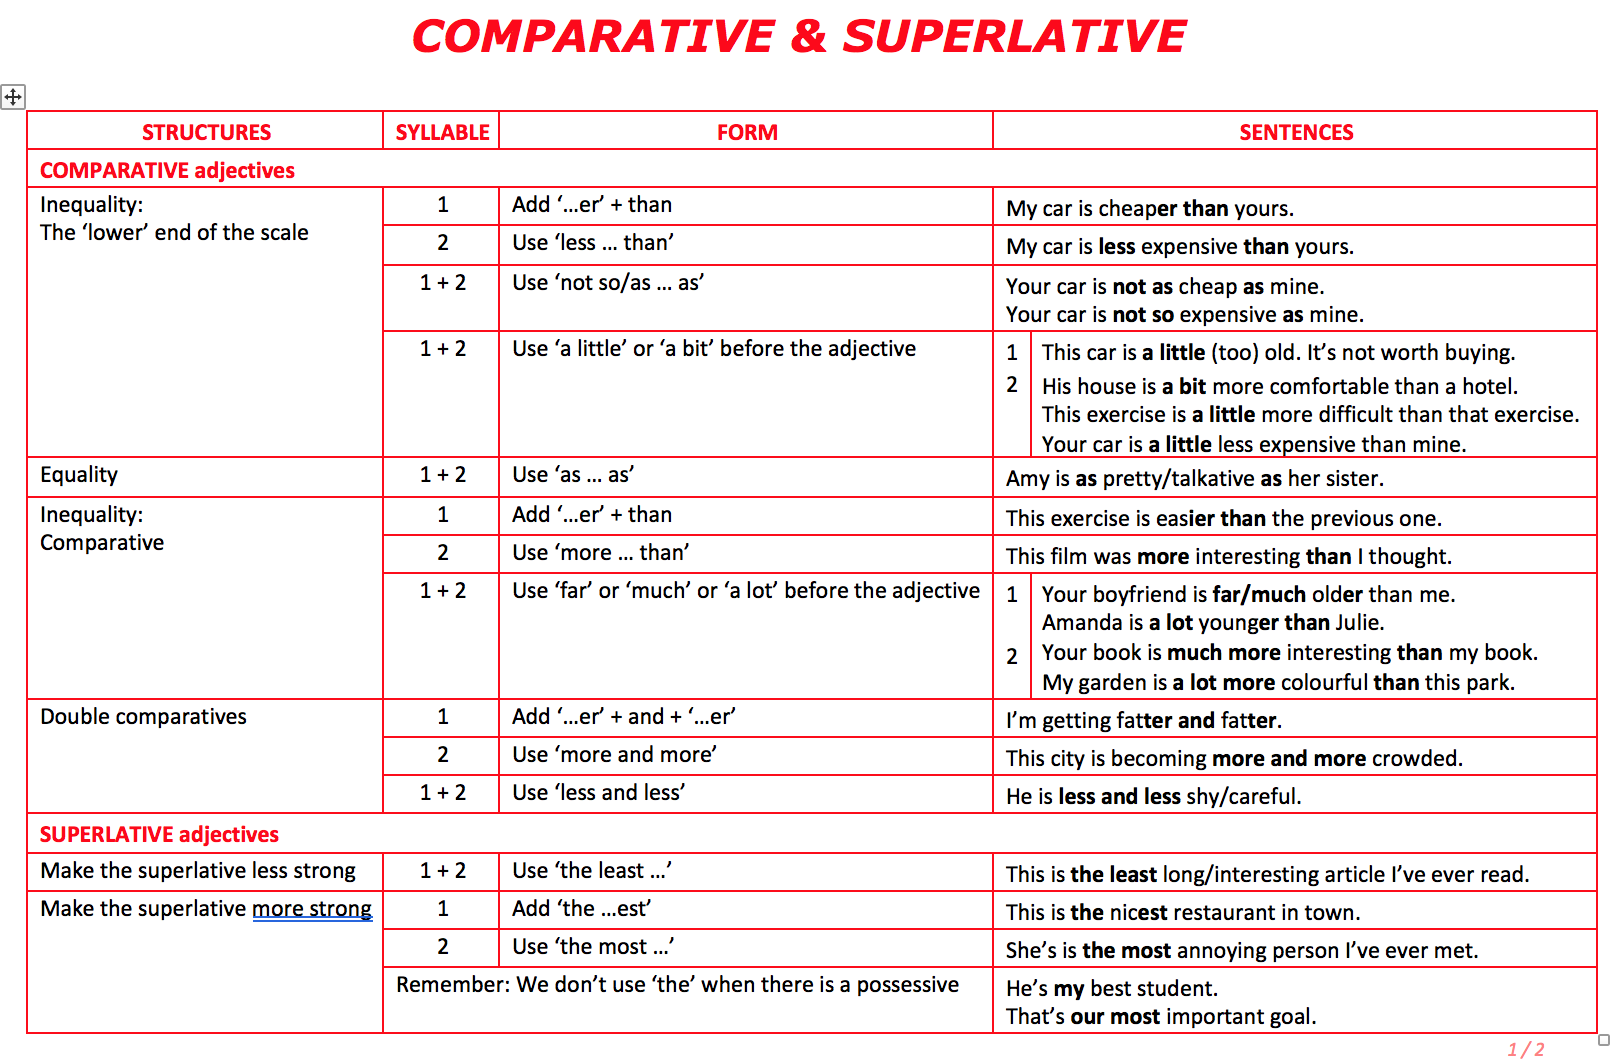 Comparatives and Superlatives правило. Degrees of Comparison of adjectives правило. Comparatives and Superlatives Rule. Adjective Comparative Superlative таблица. Comparative city